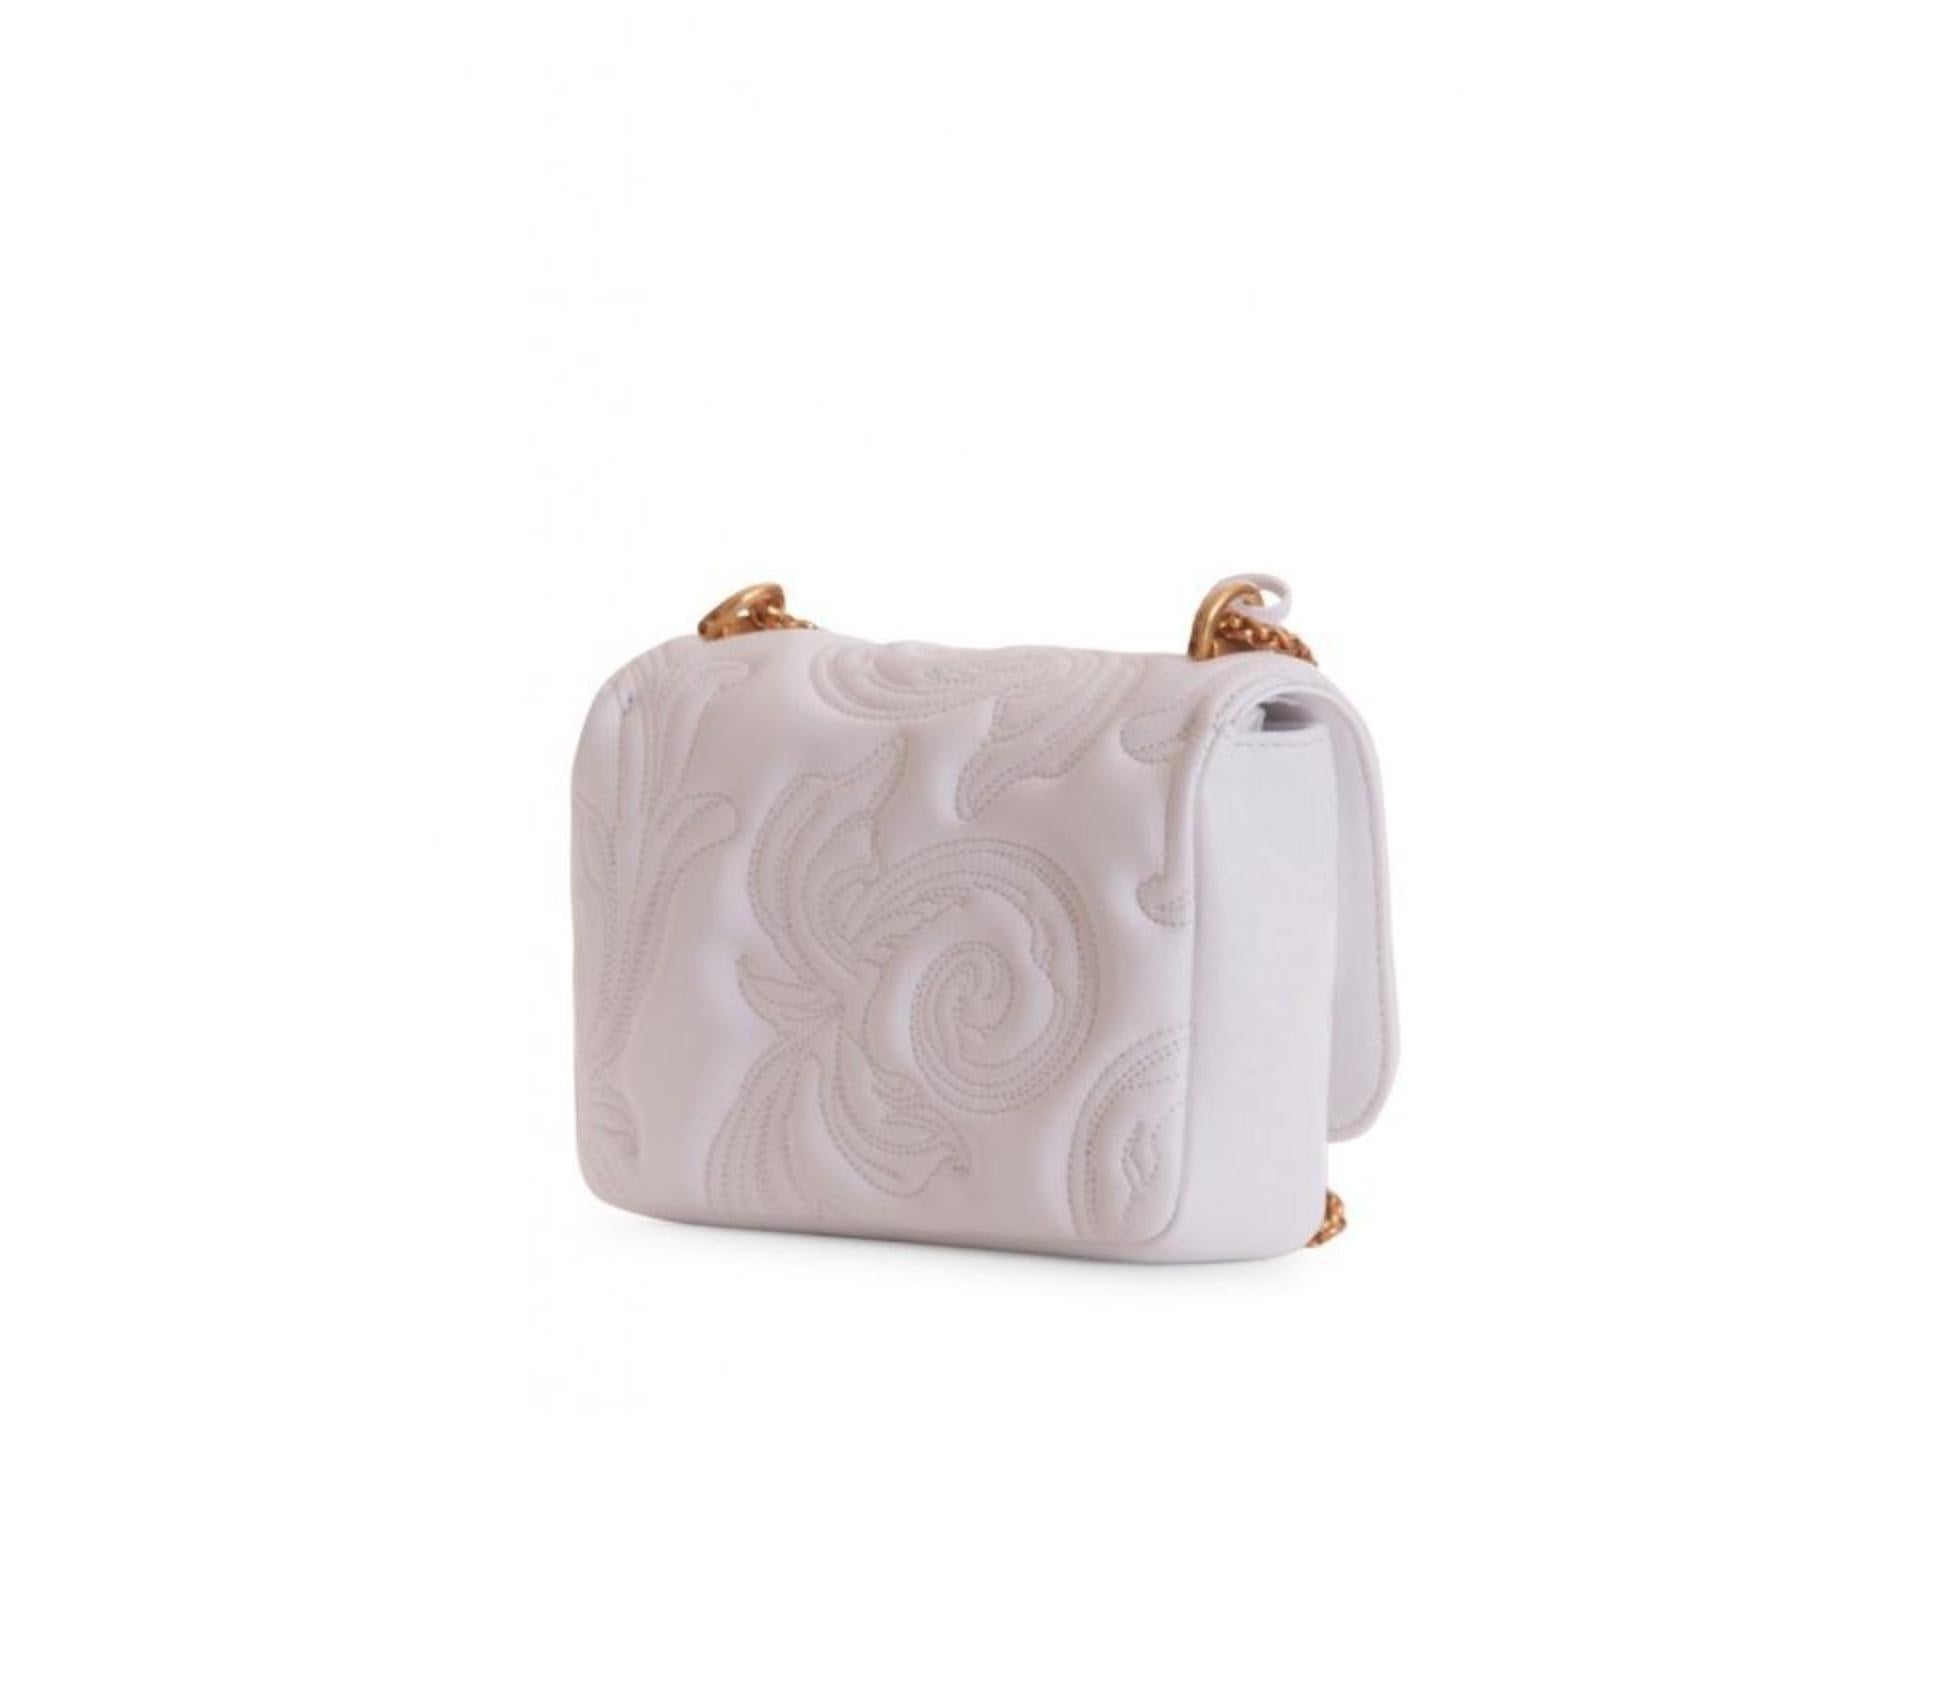 This small Versace white icon shoulder bag features a Barocco embroidery, gold tone hardware and chain, a flap with 2 medusa studs, a twist clasp, and one main compartment with a slip pocket. The small icon shoulder bag is both functional and